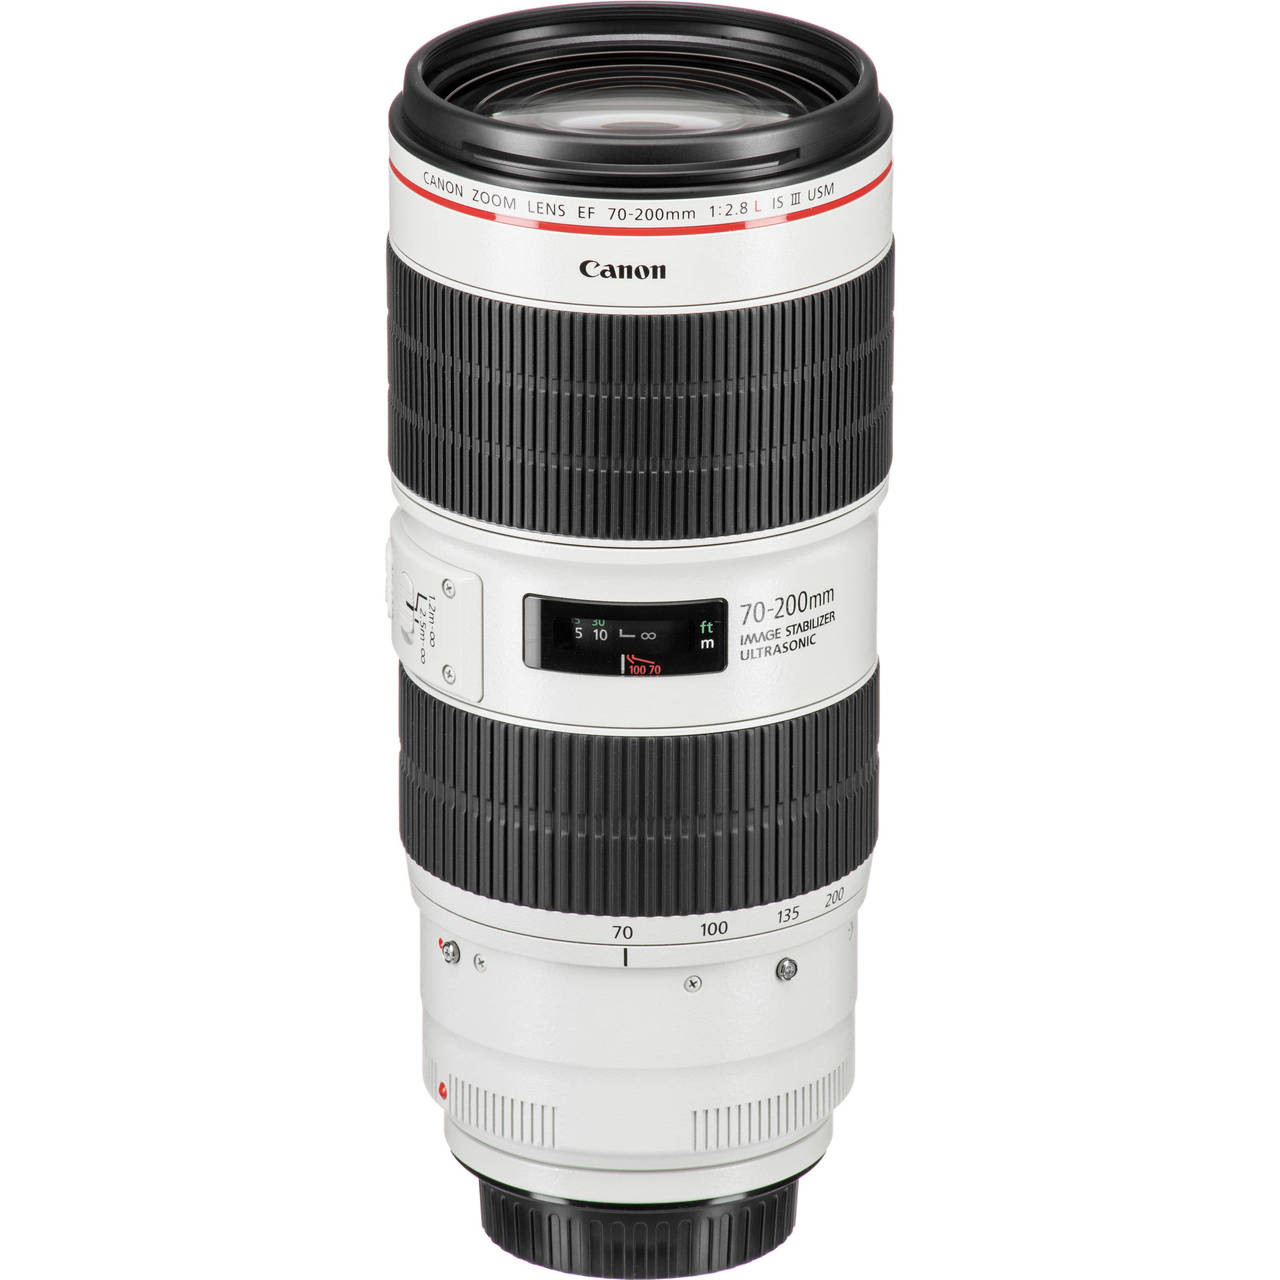 Canon EF 70-200mm f/2.8L IS III USM Lens - Ace Photo